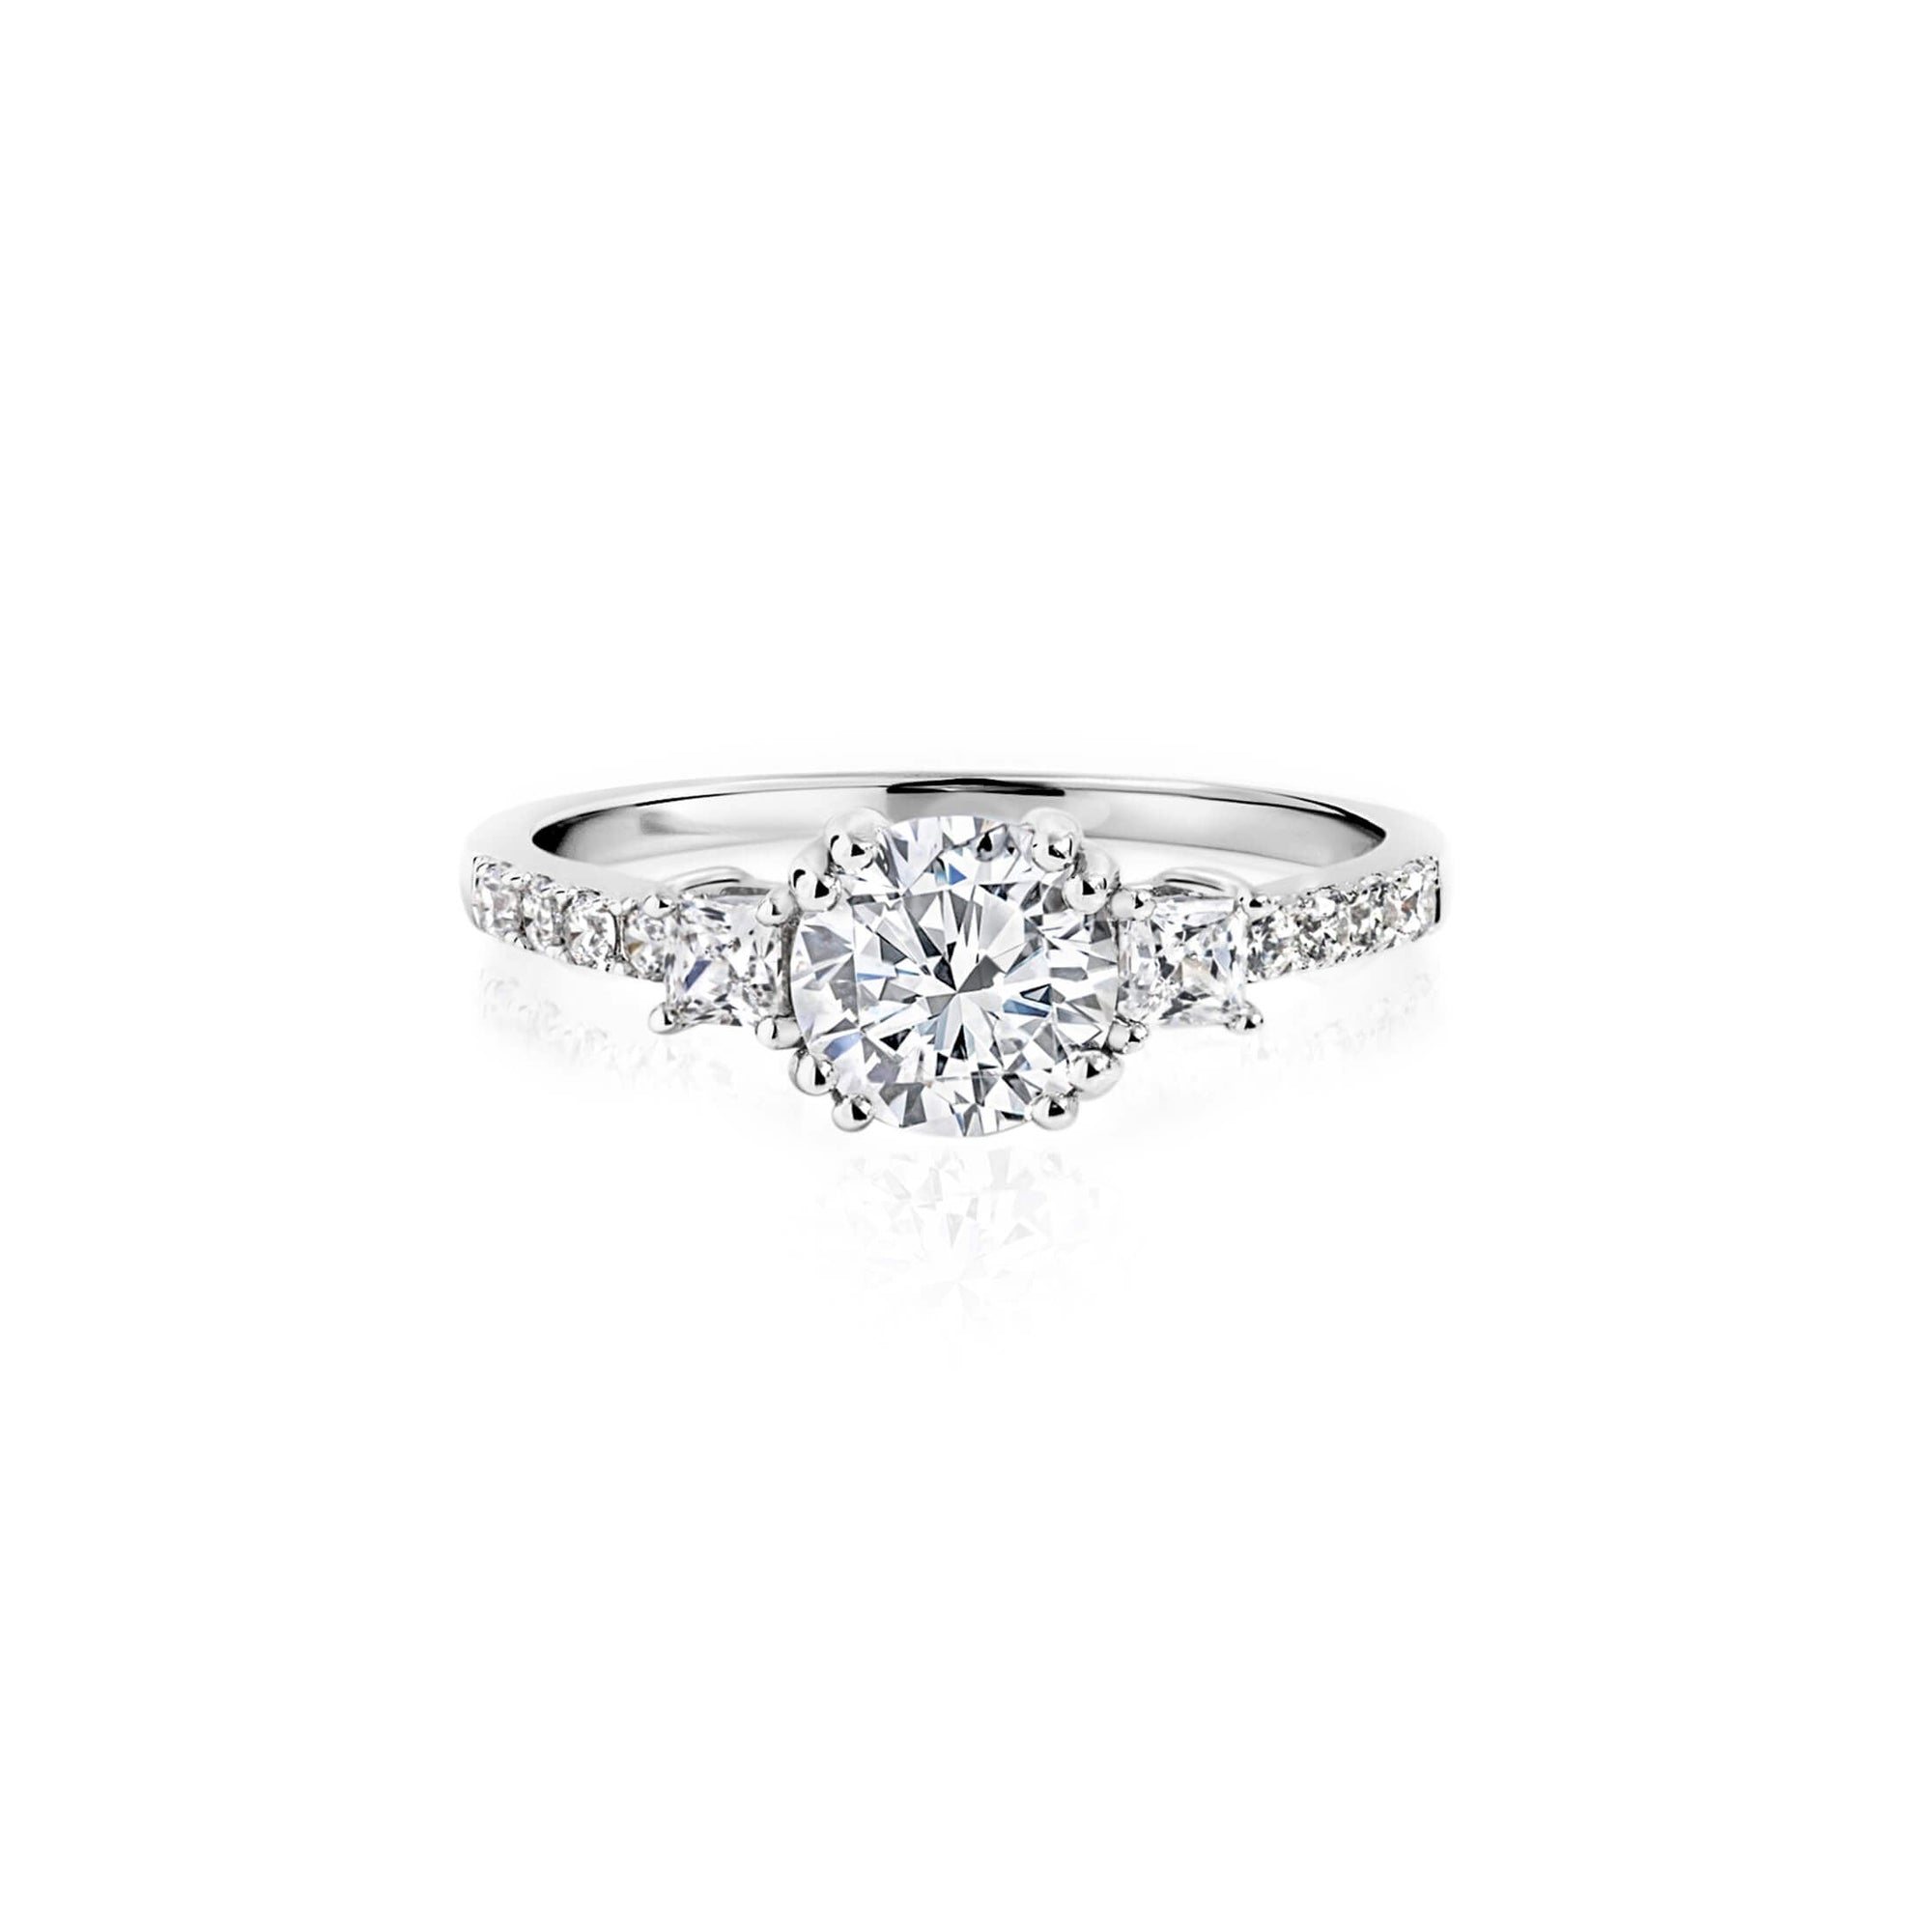 EPOCH ENGAGEMENT RING - Trove & Co.